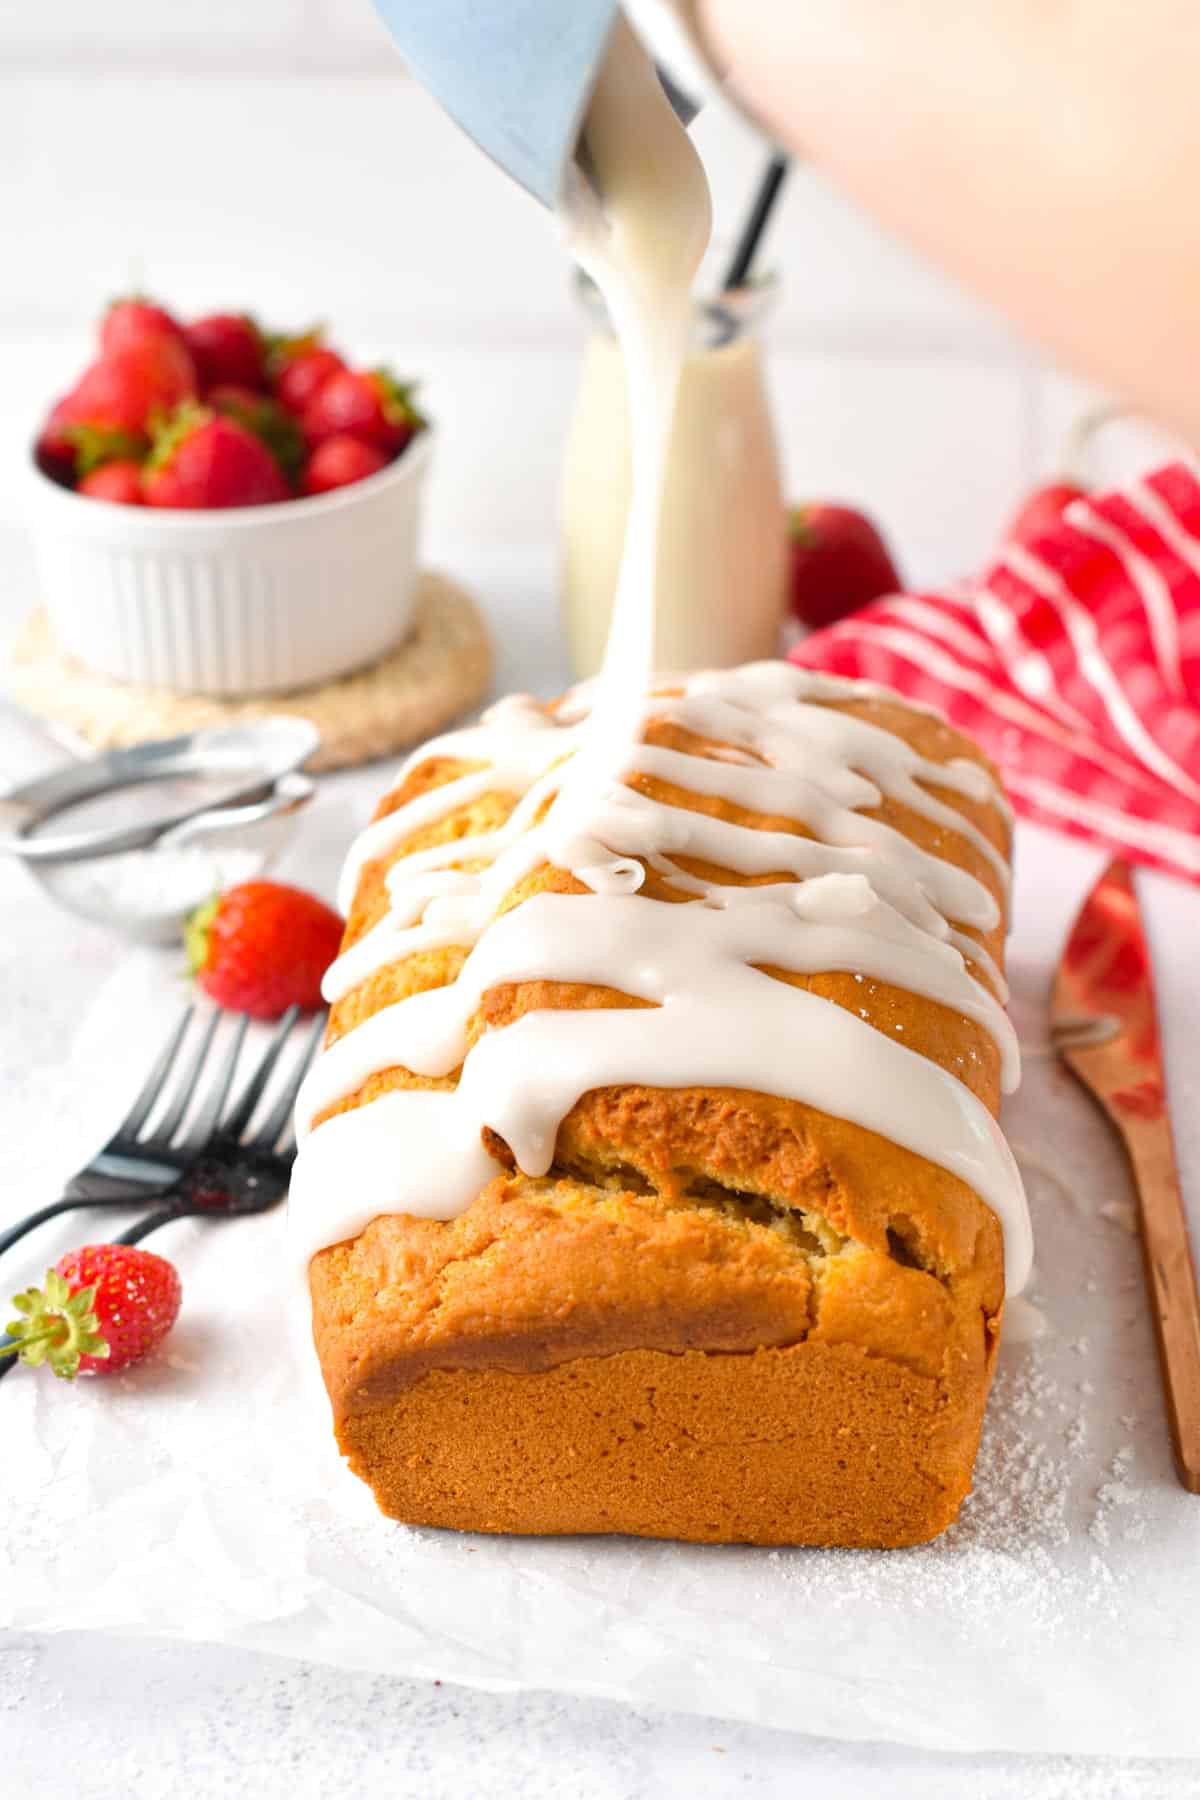 This Vegan Pound Cake recipe is a moist, buttery vanilla pound cake recipe made in one bowl and perfect as a breakfast or dessert. Plus, you will love its vanilla icing that turns the crumb even more tender and moist.